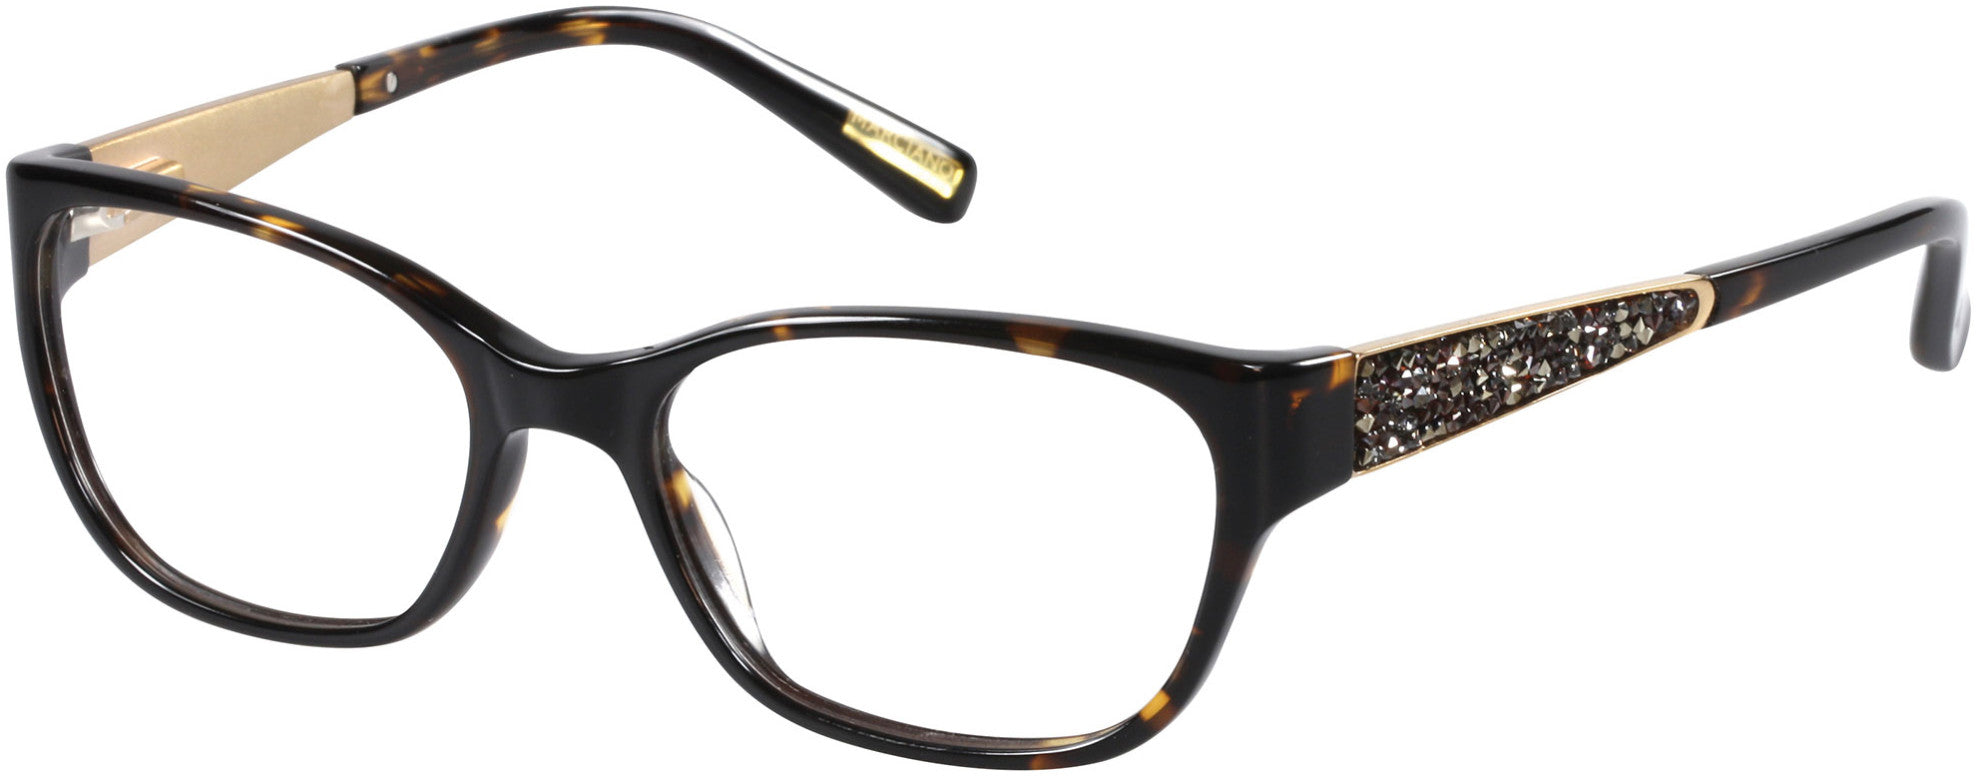 Guess By Marciano GM0243 Square Eyeglasses S30-S30 - Scale